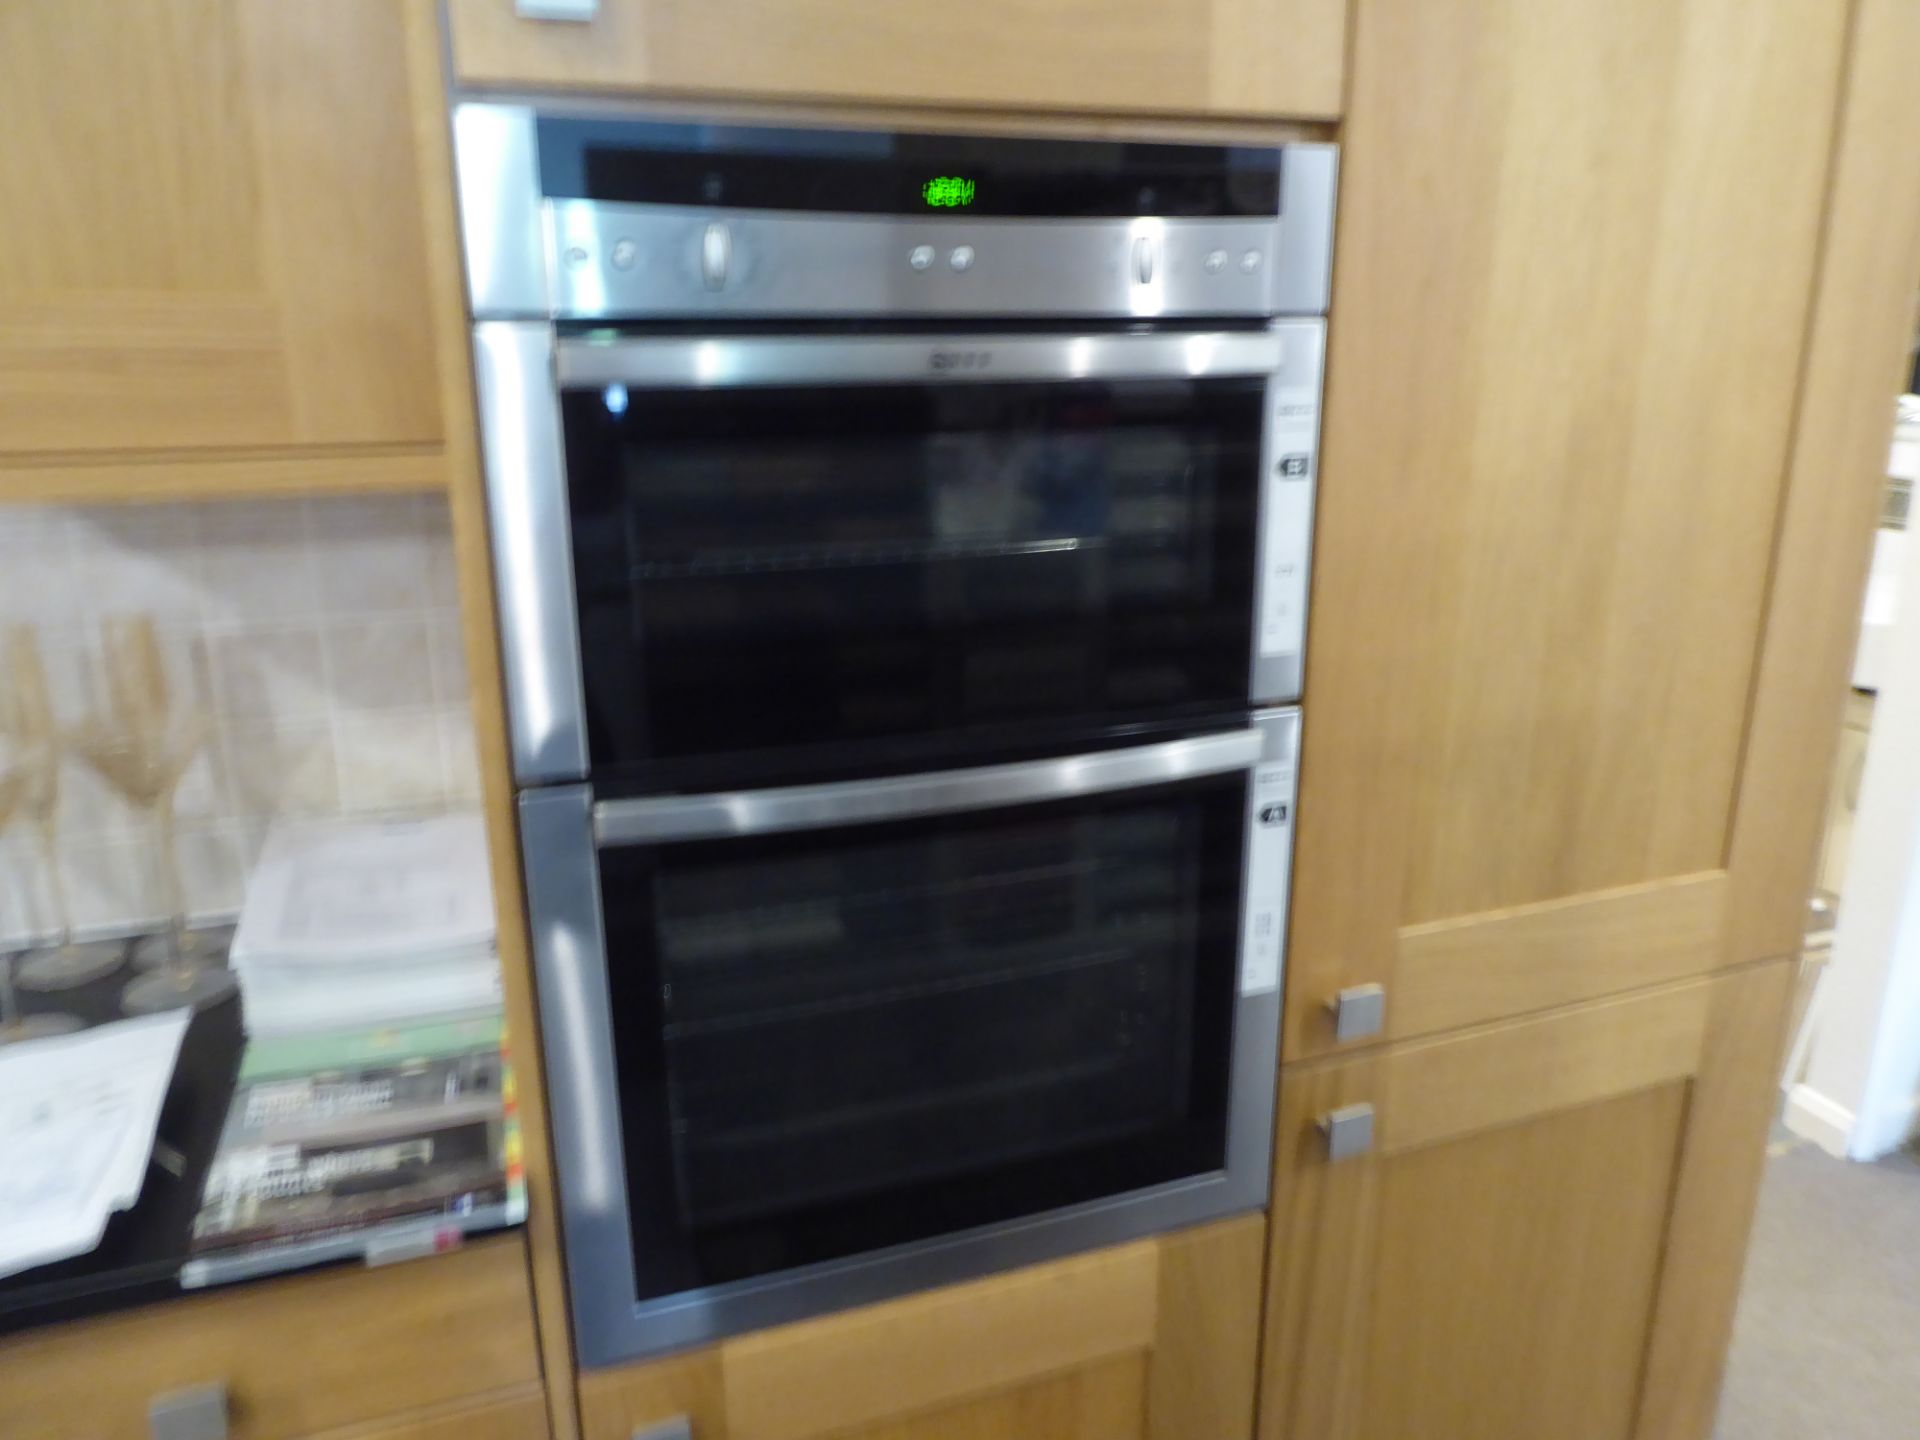 Neff U15E42NOGB stainless steel built in double oven. Demonstration use.